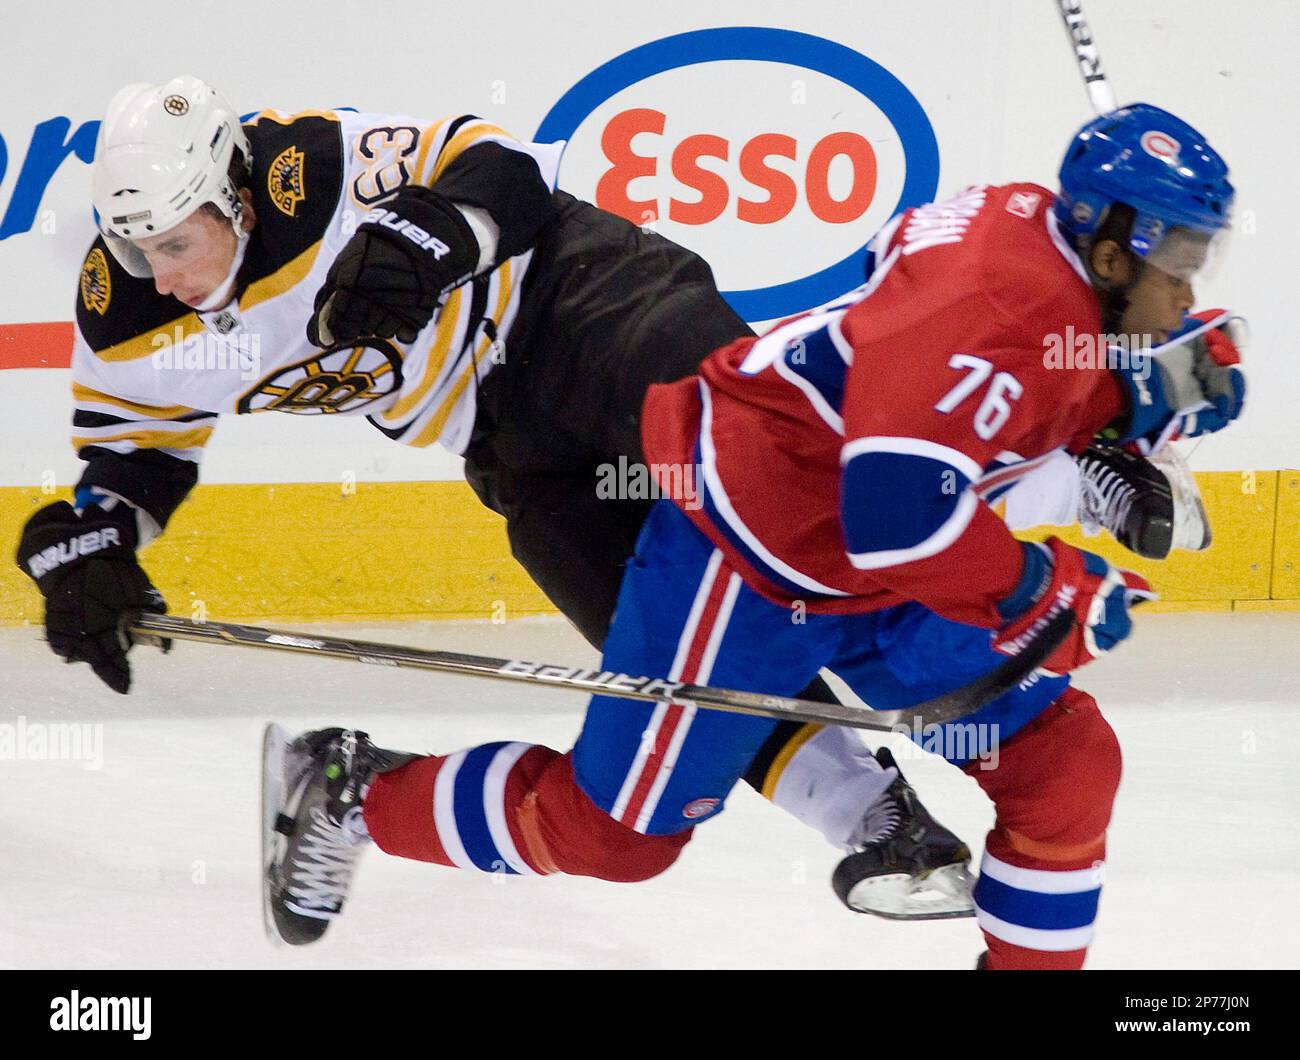 FILE - In this Dec. 16, 2010, file photo, Montreal Canadiens' P.K. Subban, right, collides with Boston Bruins' Brad Marchand during an NHL hockey game in Montreal. If there was one Montreal Canadien who got under the Boston Bruins' skin this season, it was Subban. So the rookie defenseman, who is chatty both on and off the ice, will be a likely target for the Bruins when they bring their physical style to the 33rd postseason matchup between the Original Six clubs. (AP Photo/The Canadian Press, Graham Hughes, File) Stock Photo